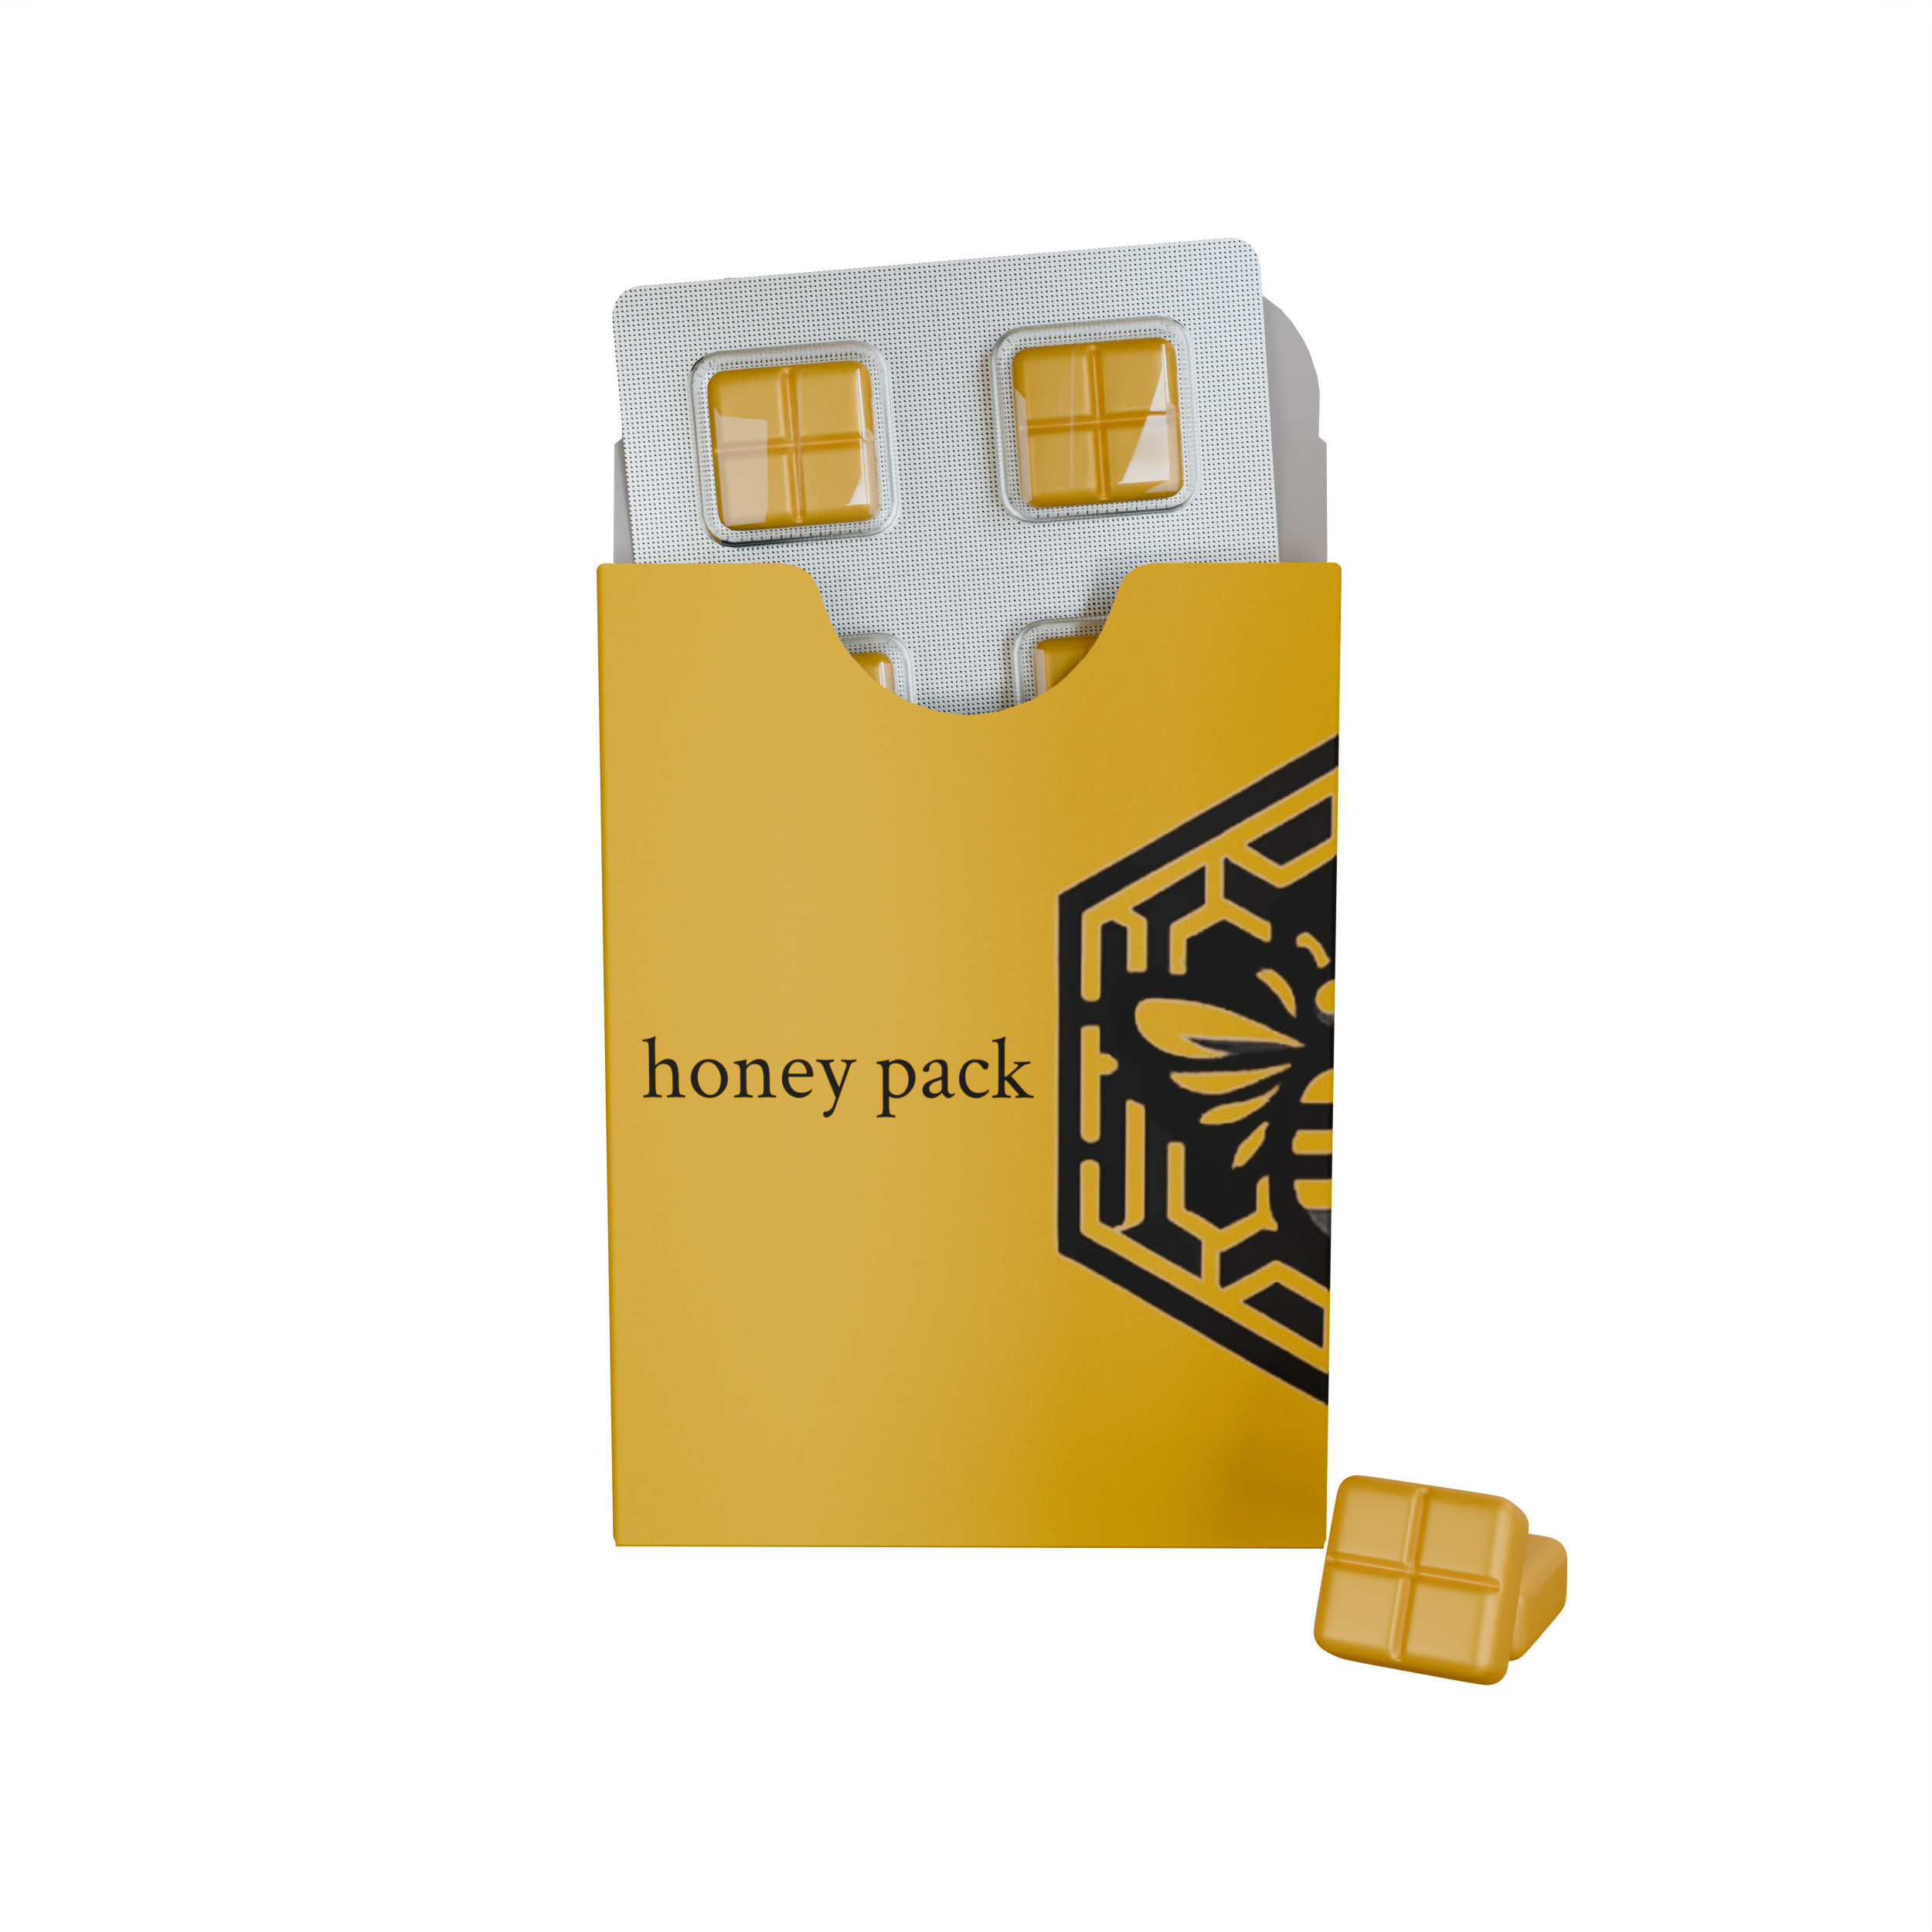 image of honeypack product